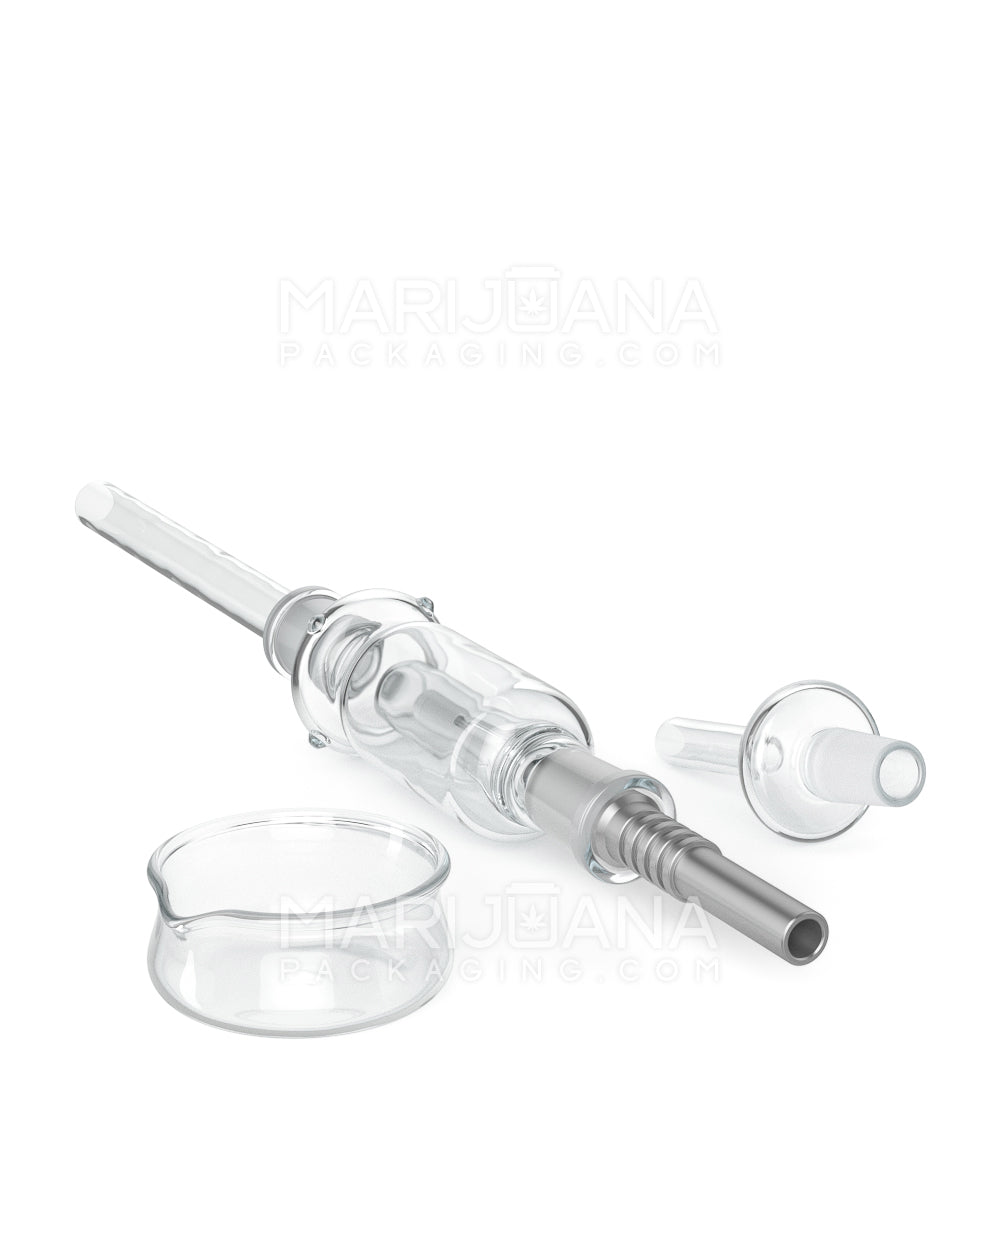 Nectar Collector Dab Pipe | 14in Long - 14mm Attachment - Clear - 8